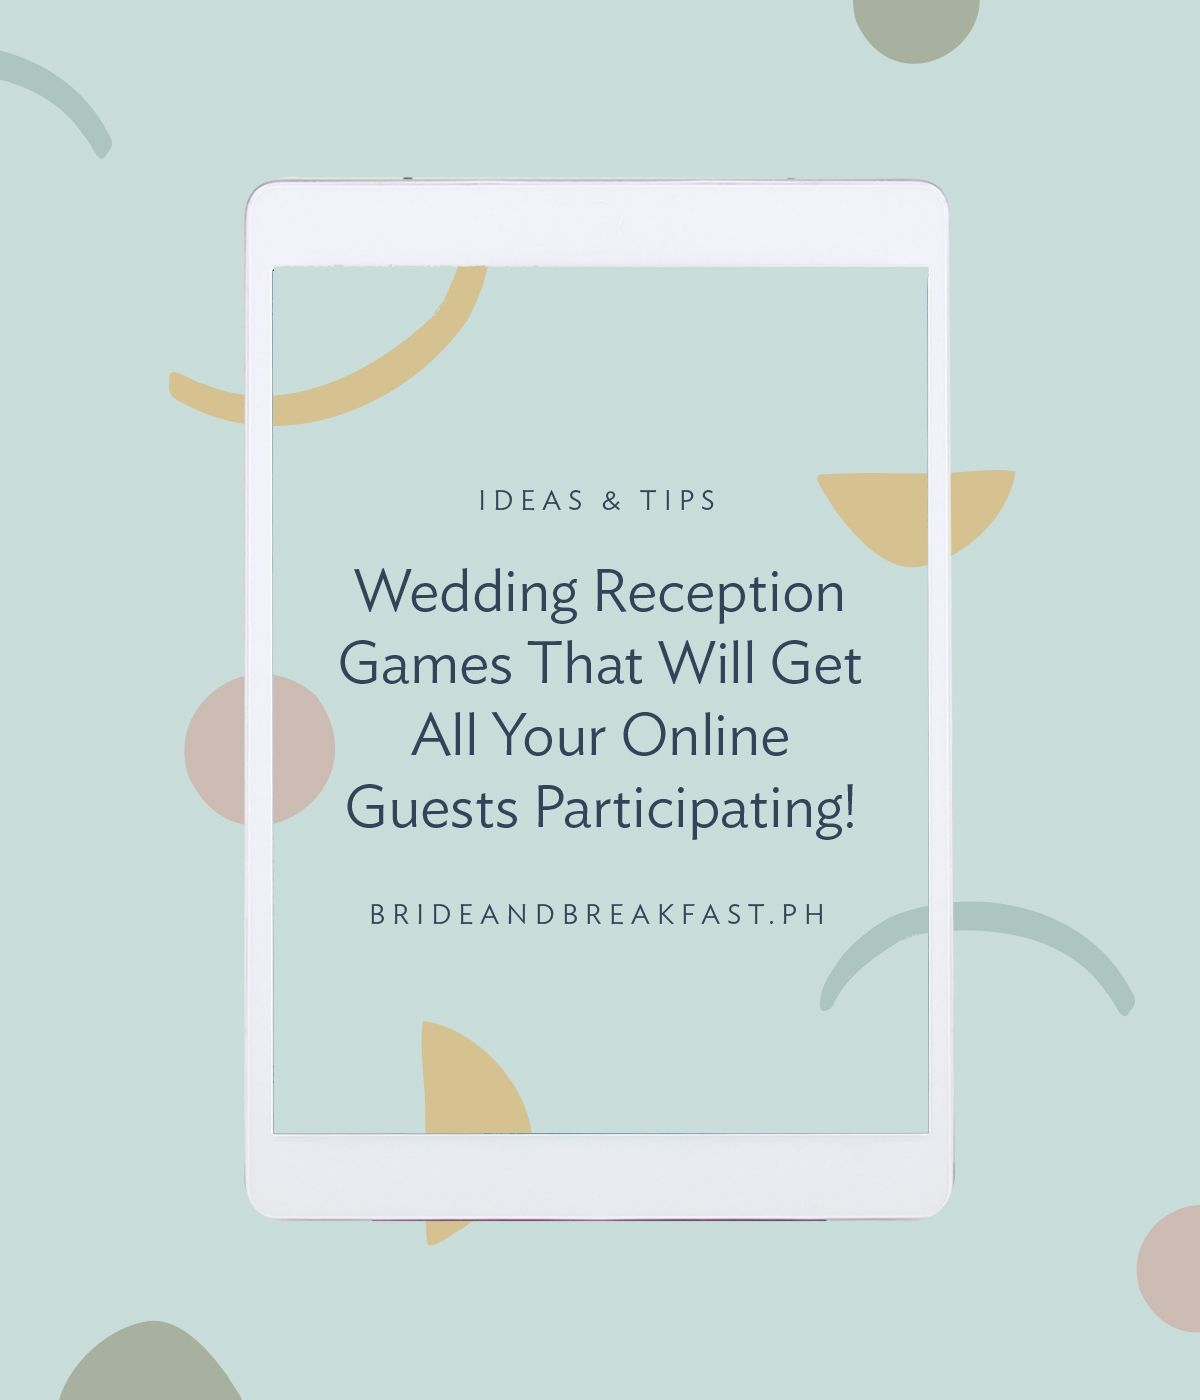 Wedding Reception Games That Will Get All Your Online Guests Participating!